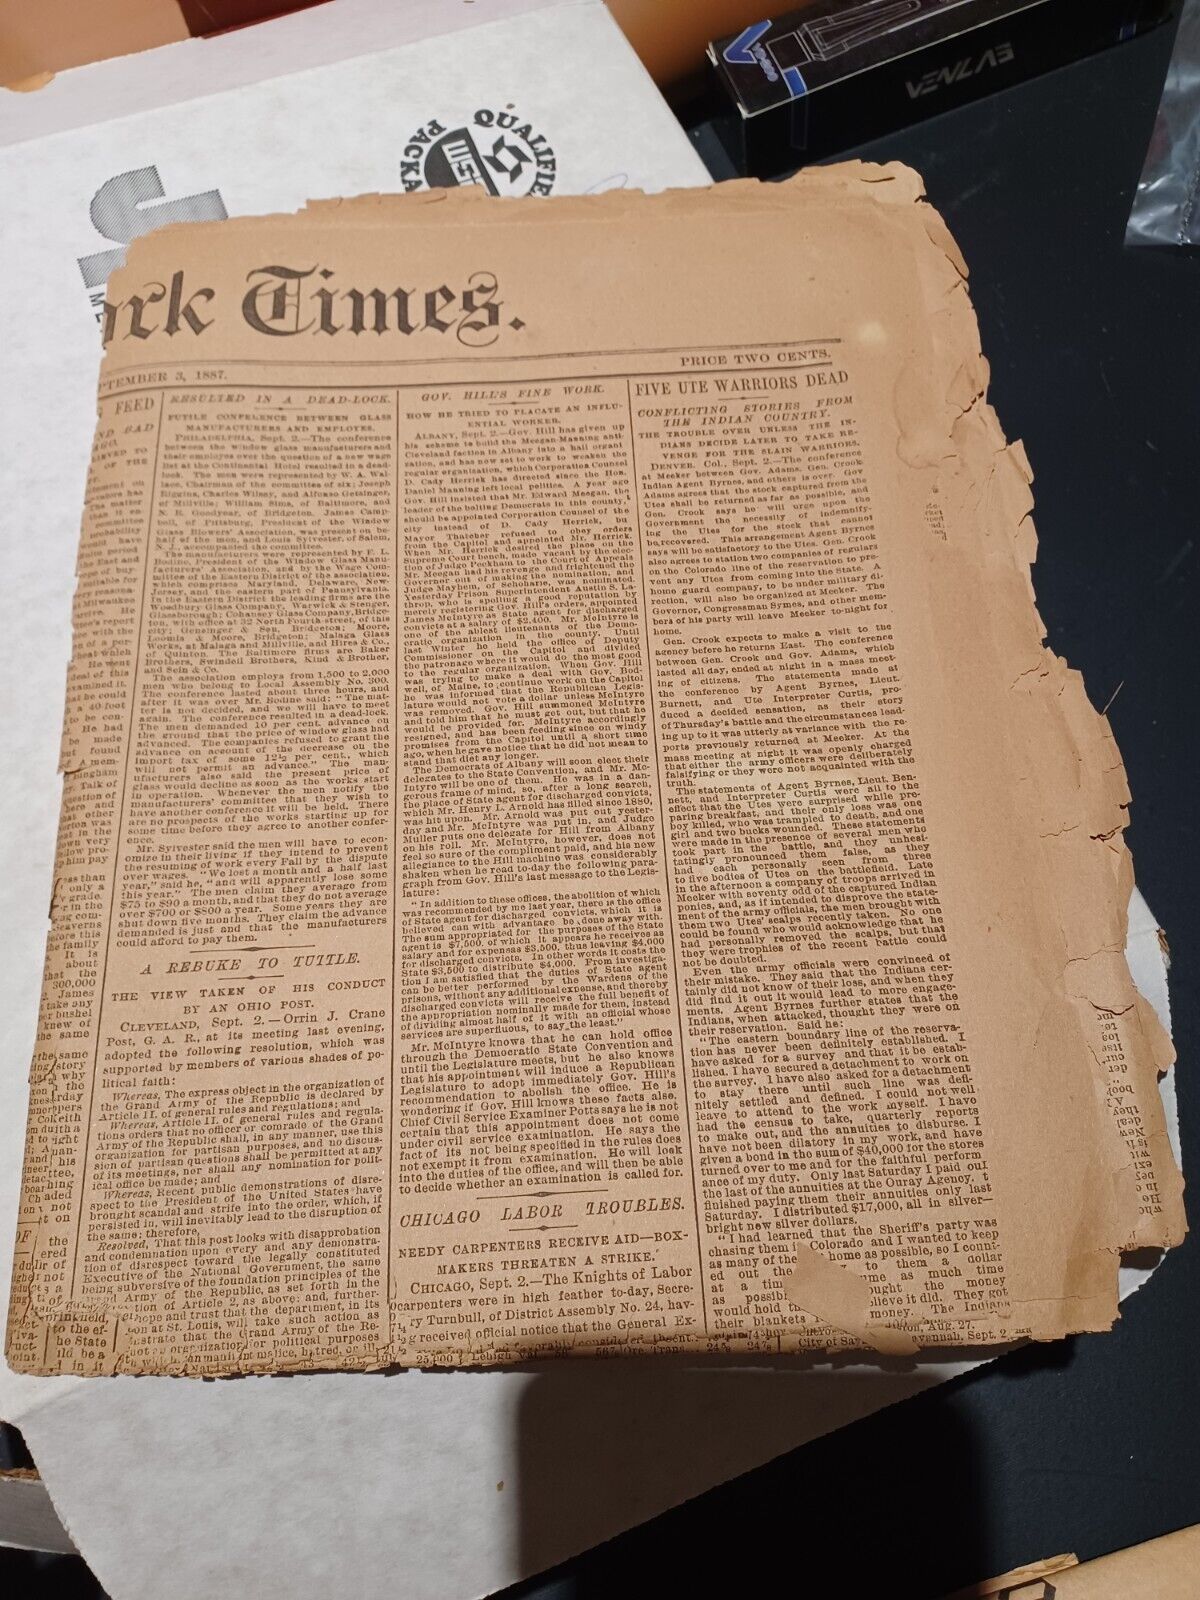 New York Times September 3rd 1887 extremely brittle and old